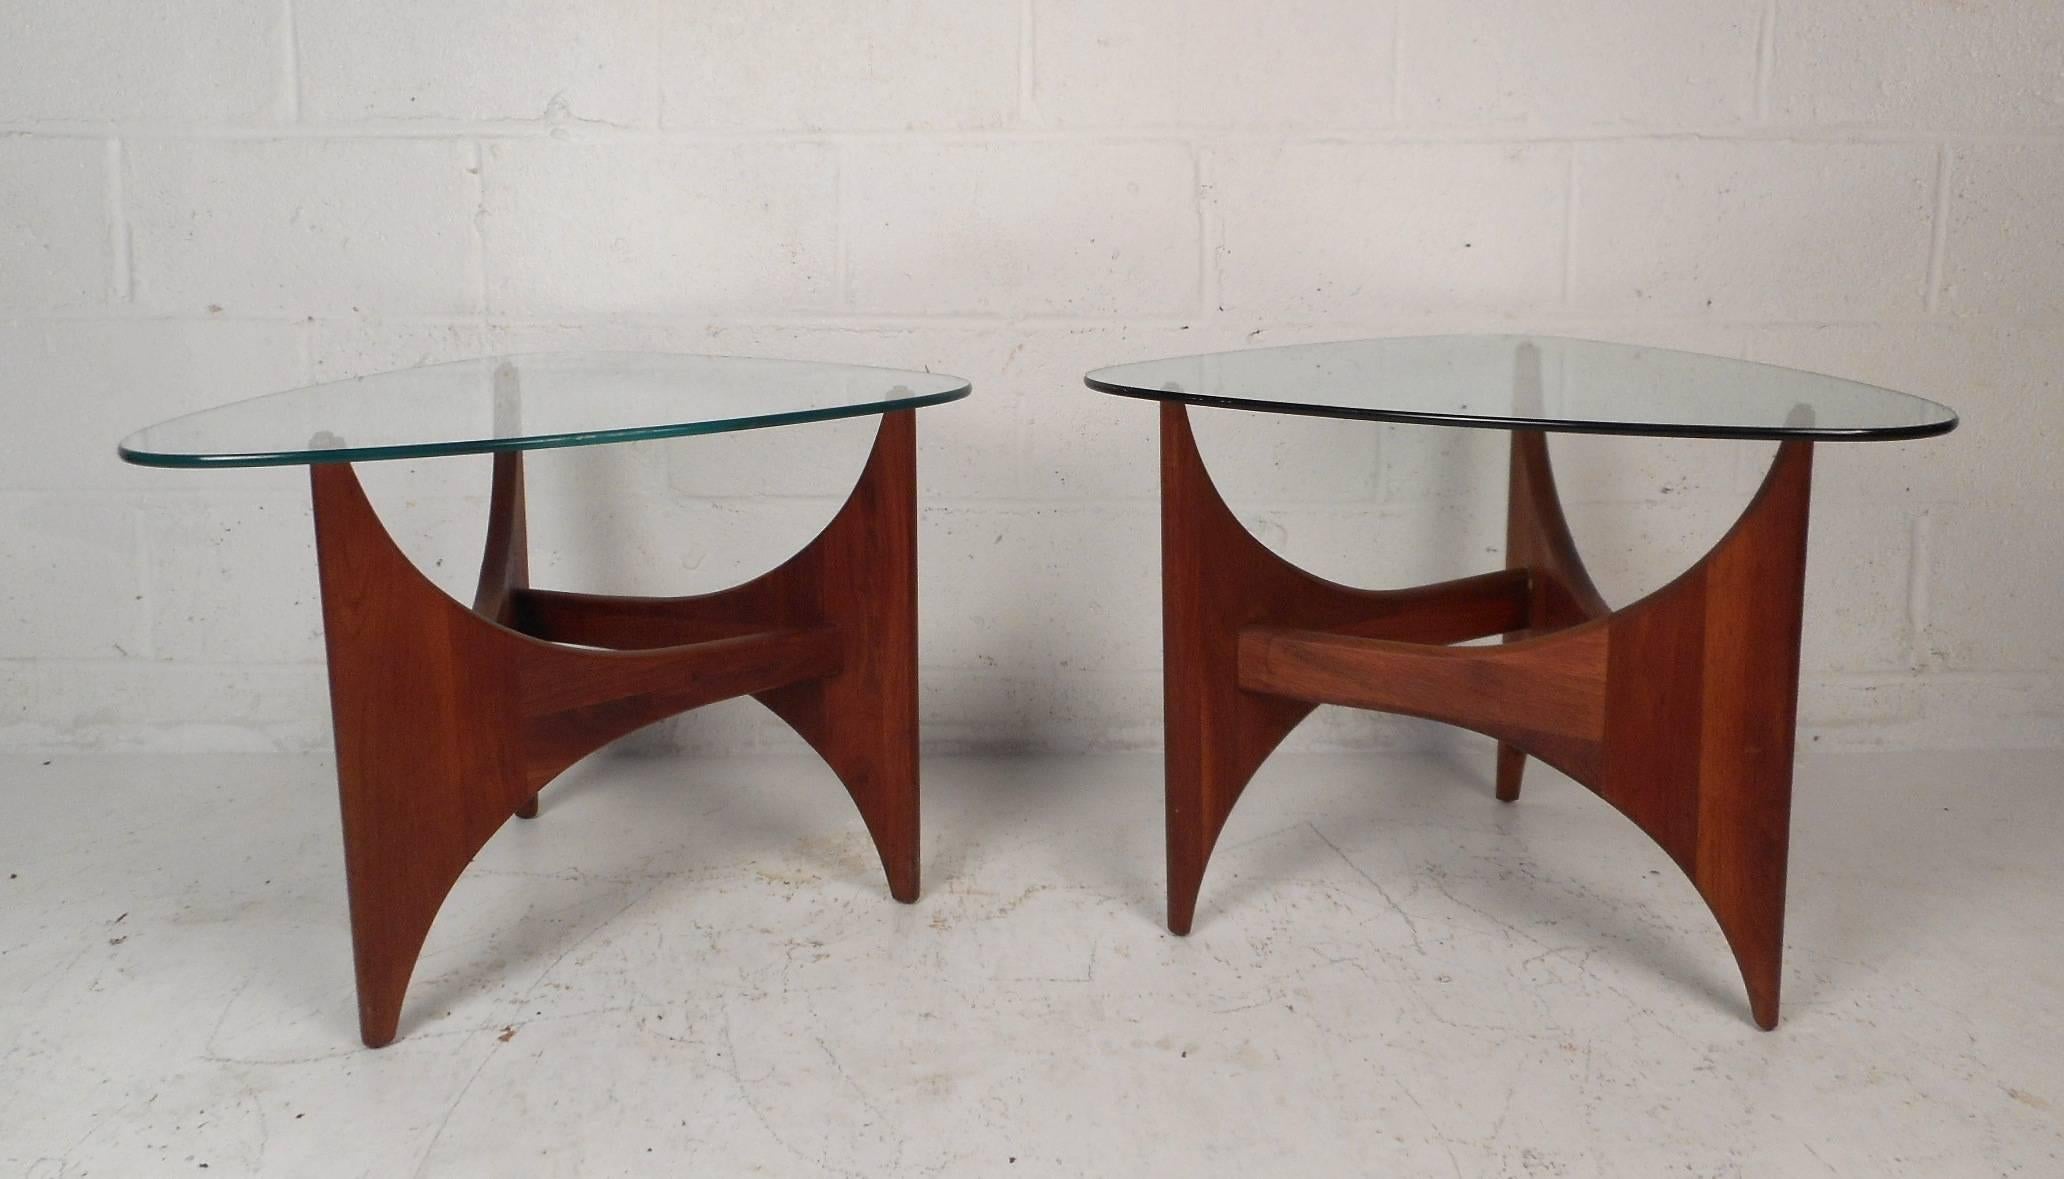 American Pair of Mid-Century Modern Triangular End Tables by Adrian Pearsall